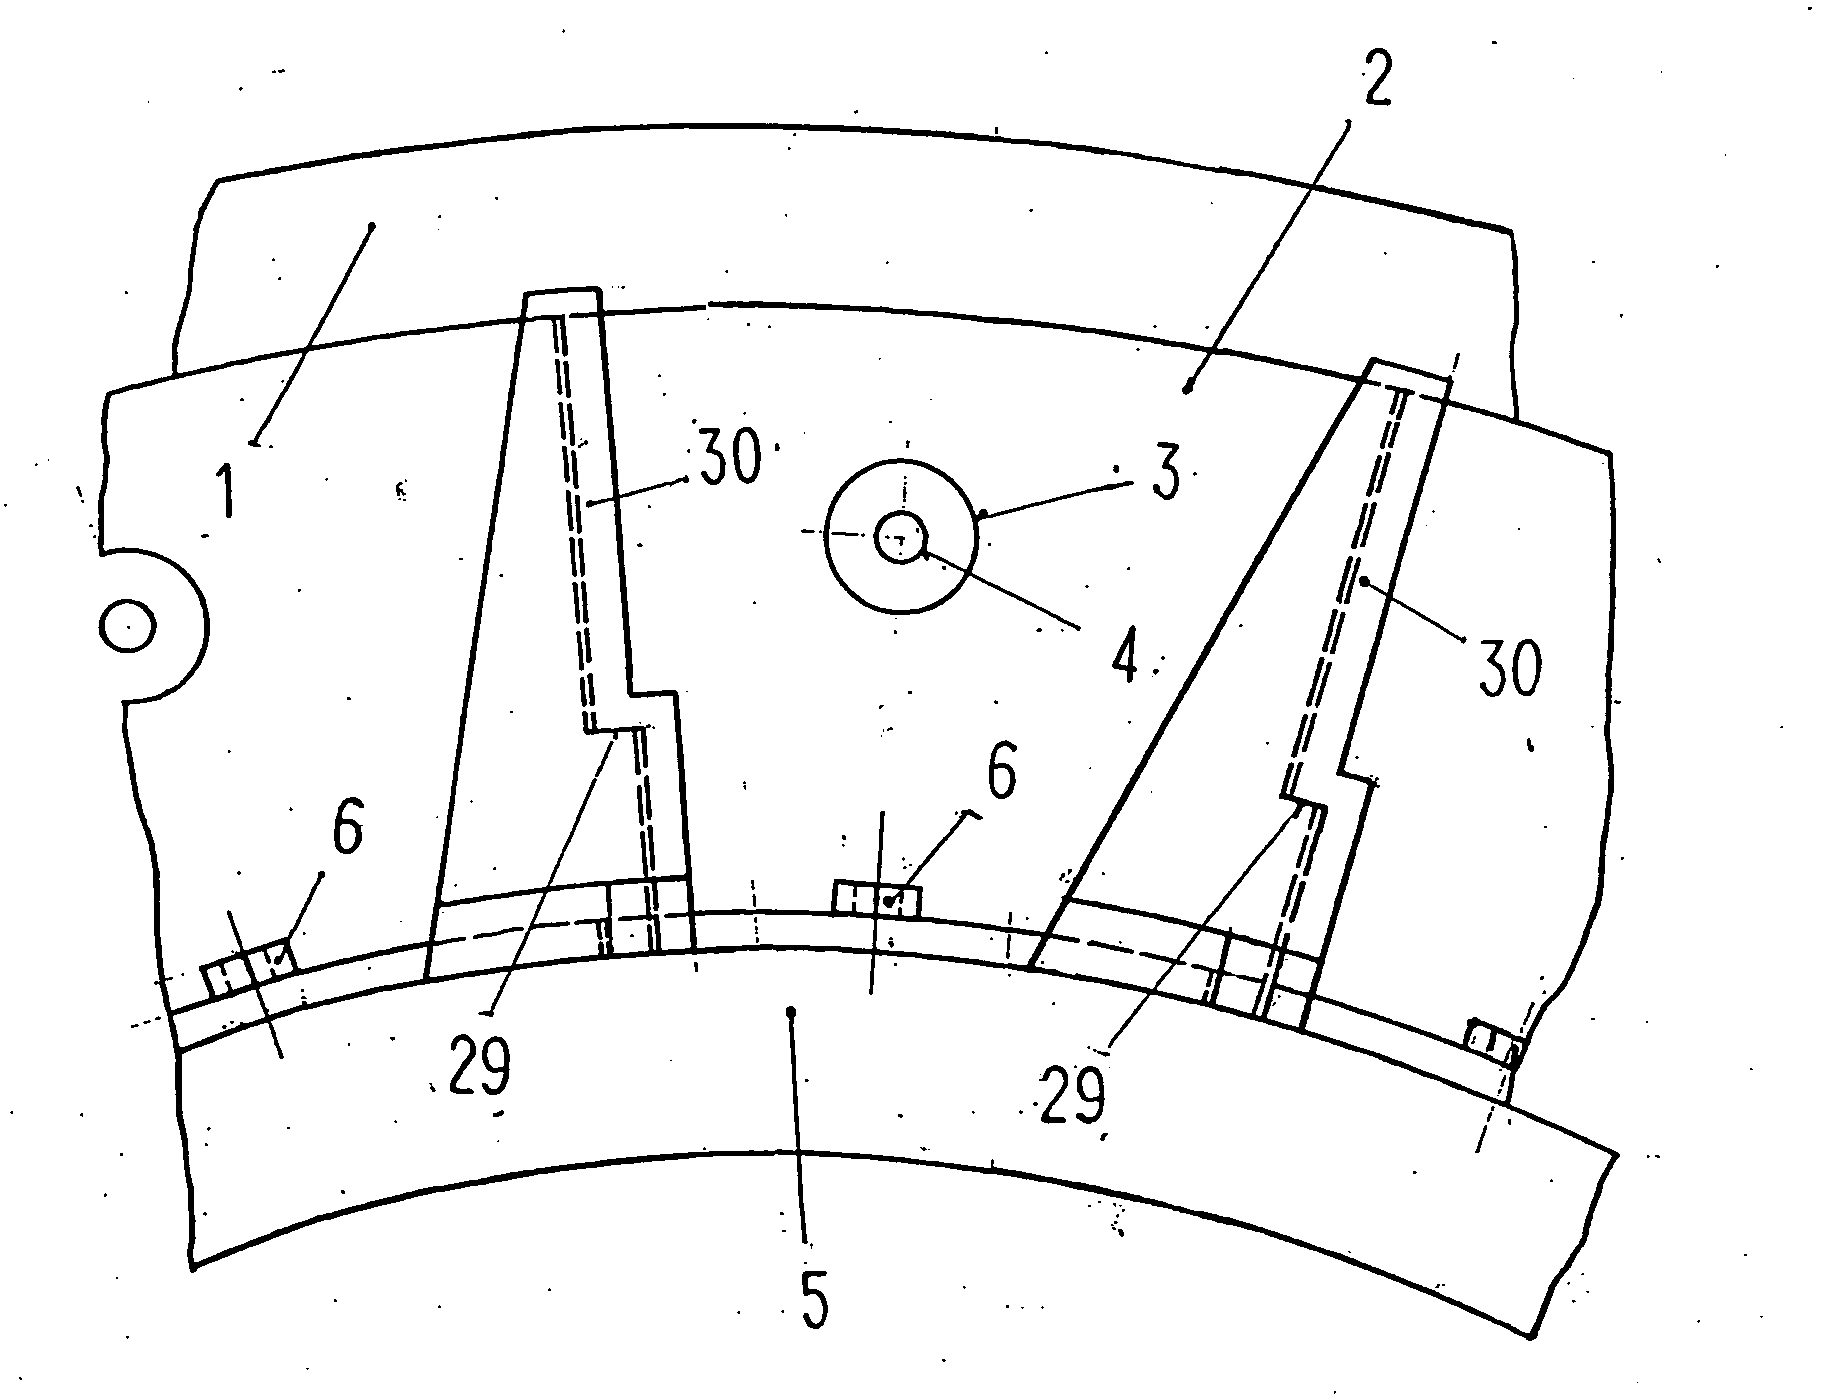 Sealing device for maxi rotary cylinder